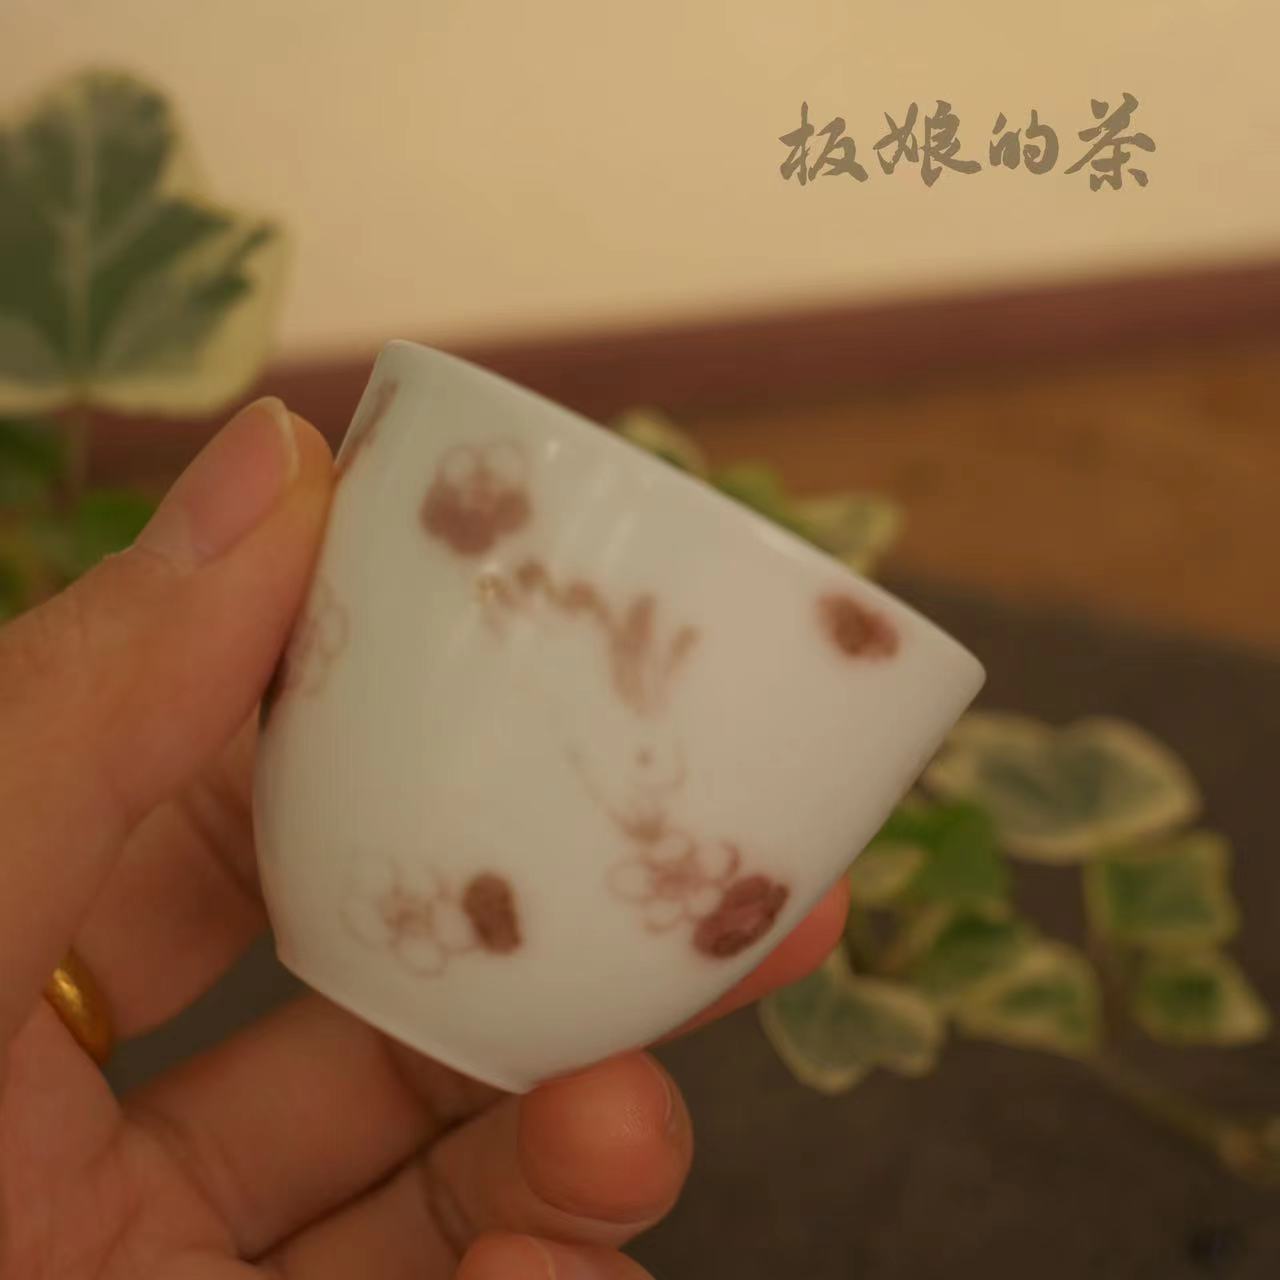 Board Lady's Tea Small Qing Breeze Red Plum Welcome Snow Rabbit Little Egg Goblet 35ml Tea Placed xrz025-Taobao